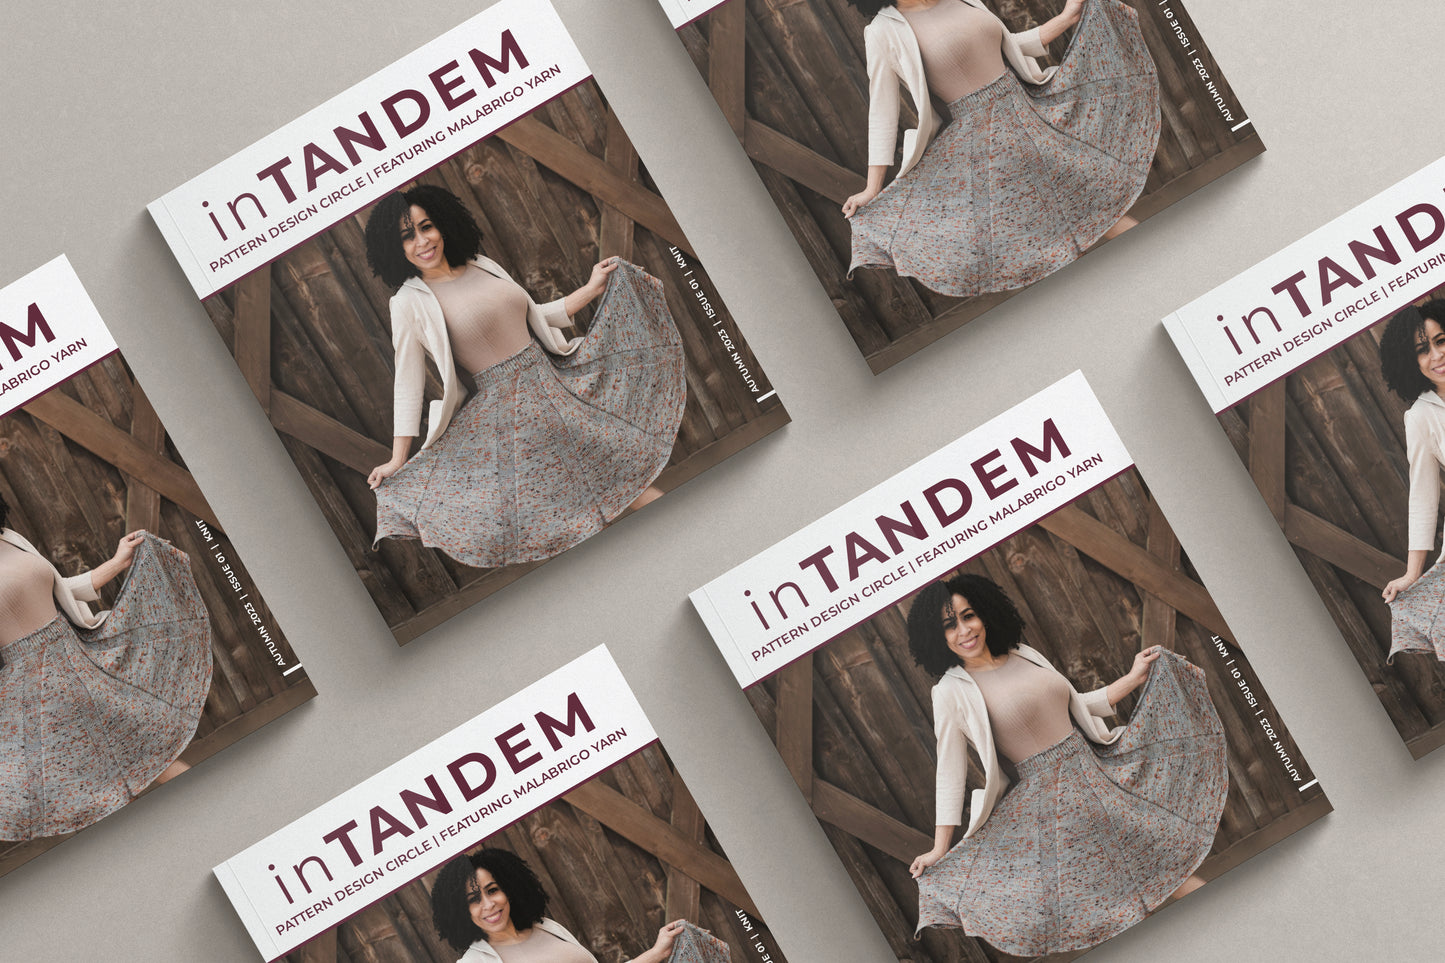 inTANDEM Issue 1